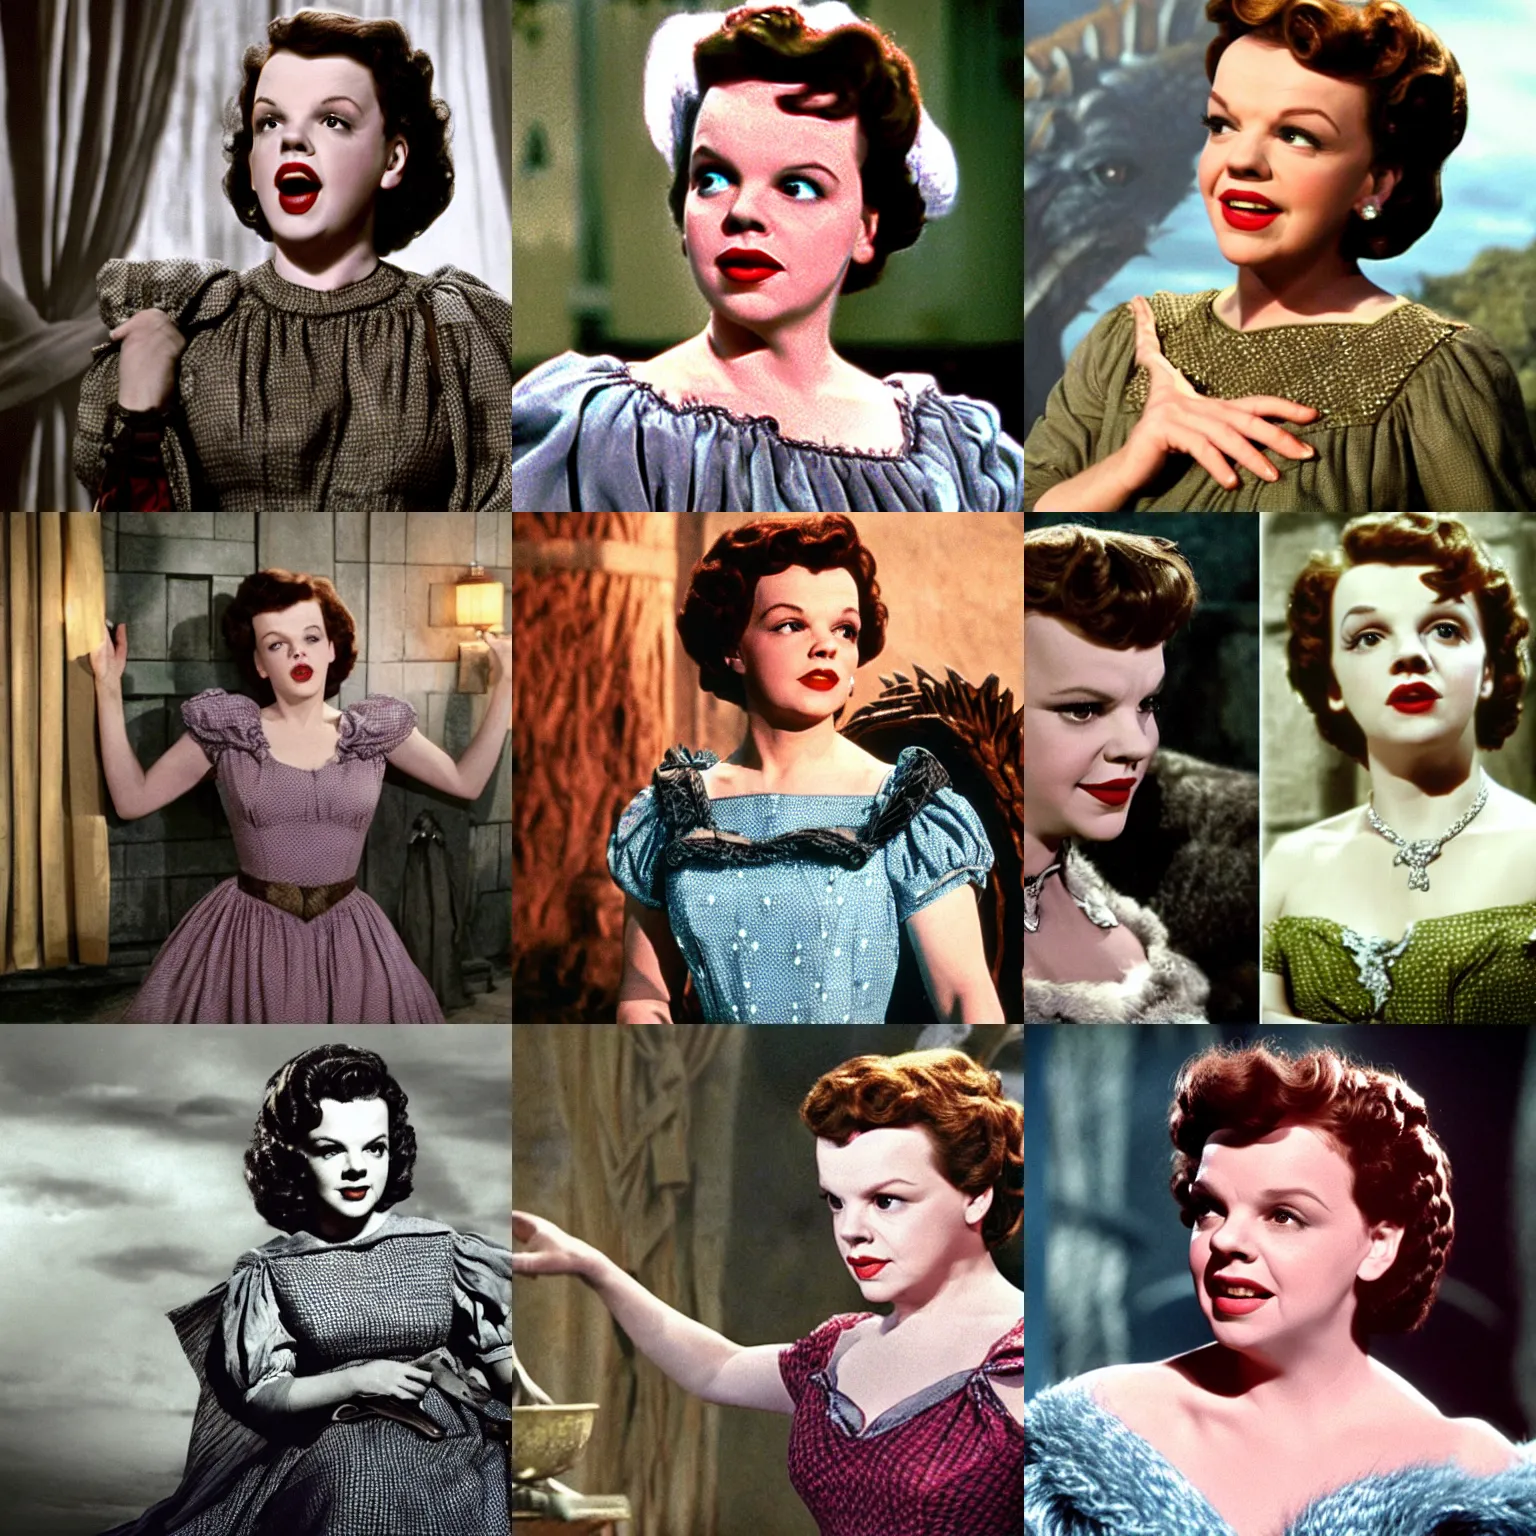 Prompt: judy garland as dorothy in game of thrones